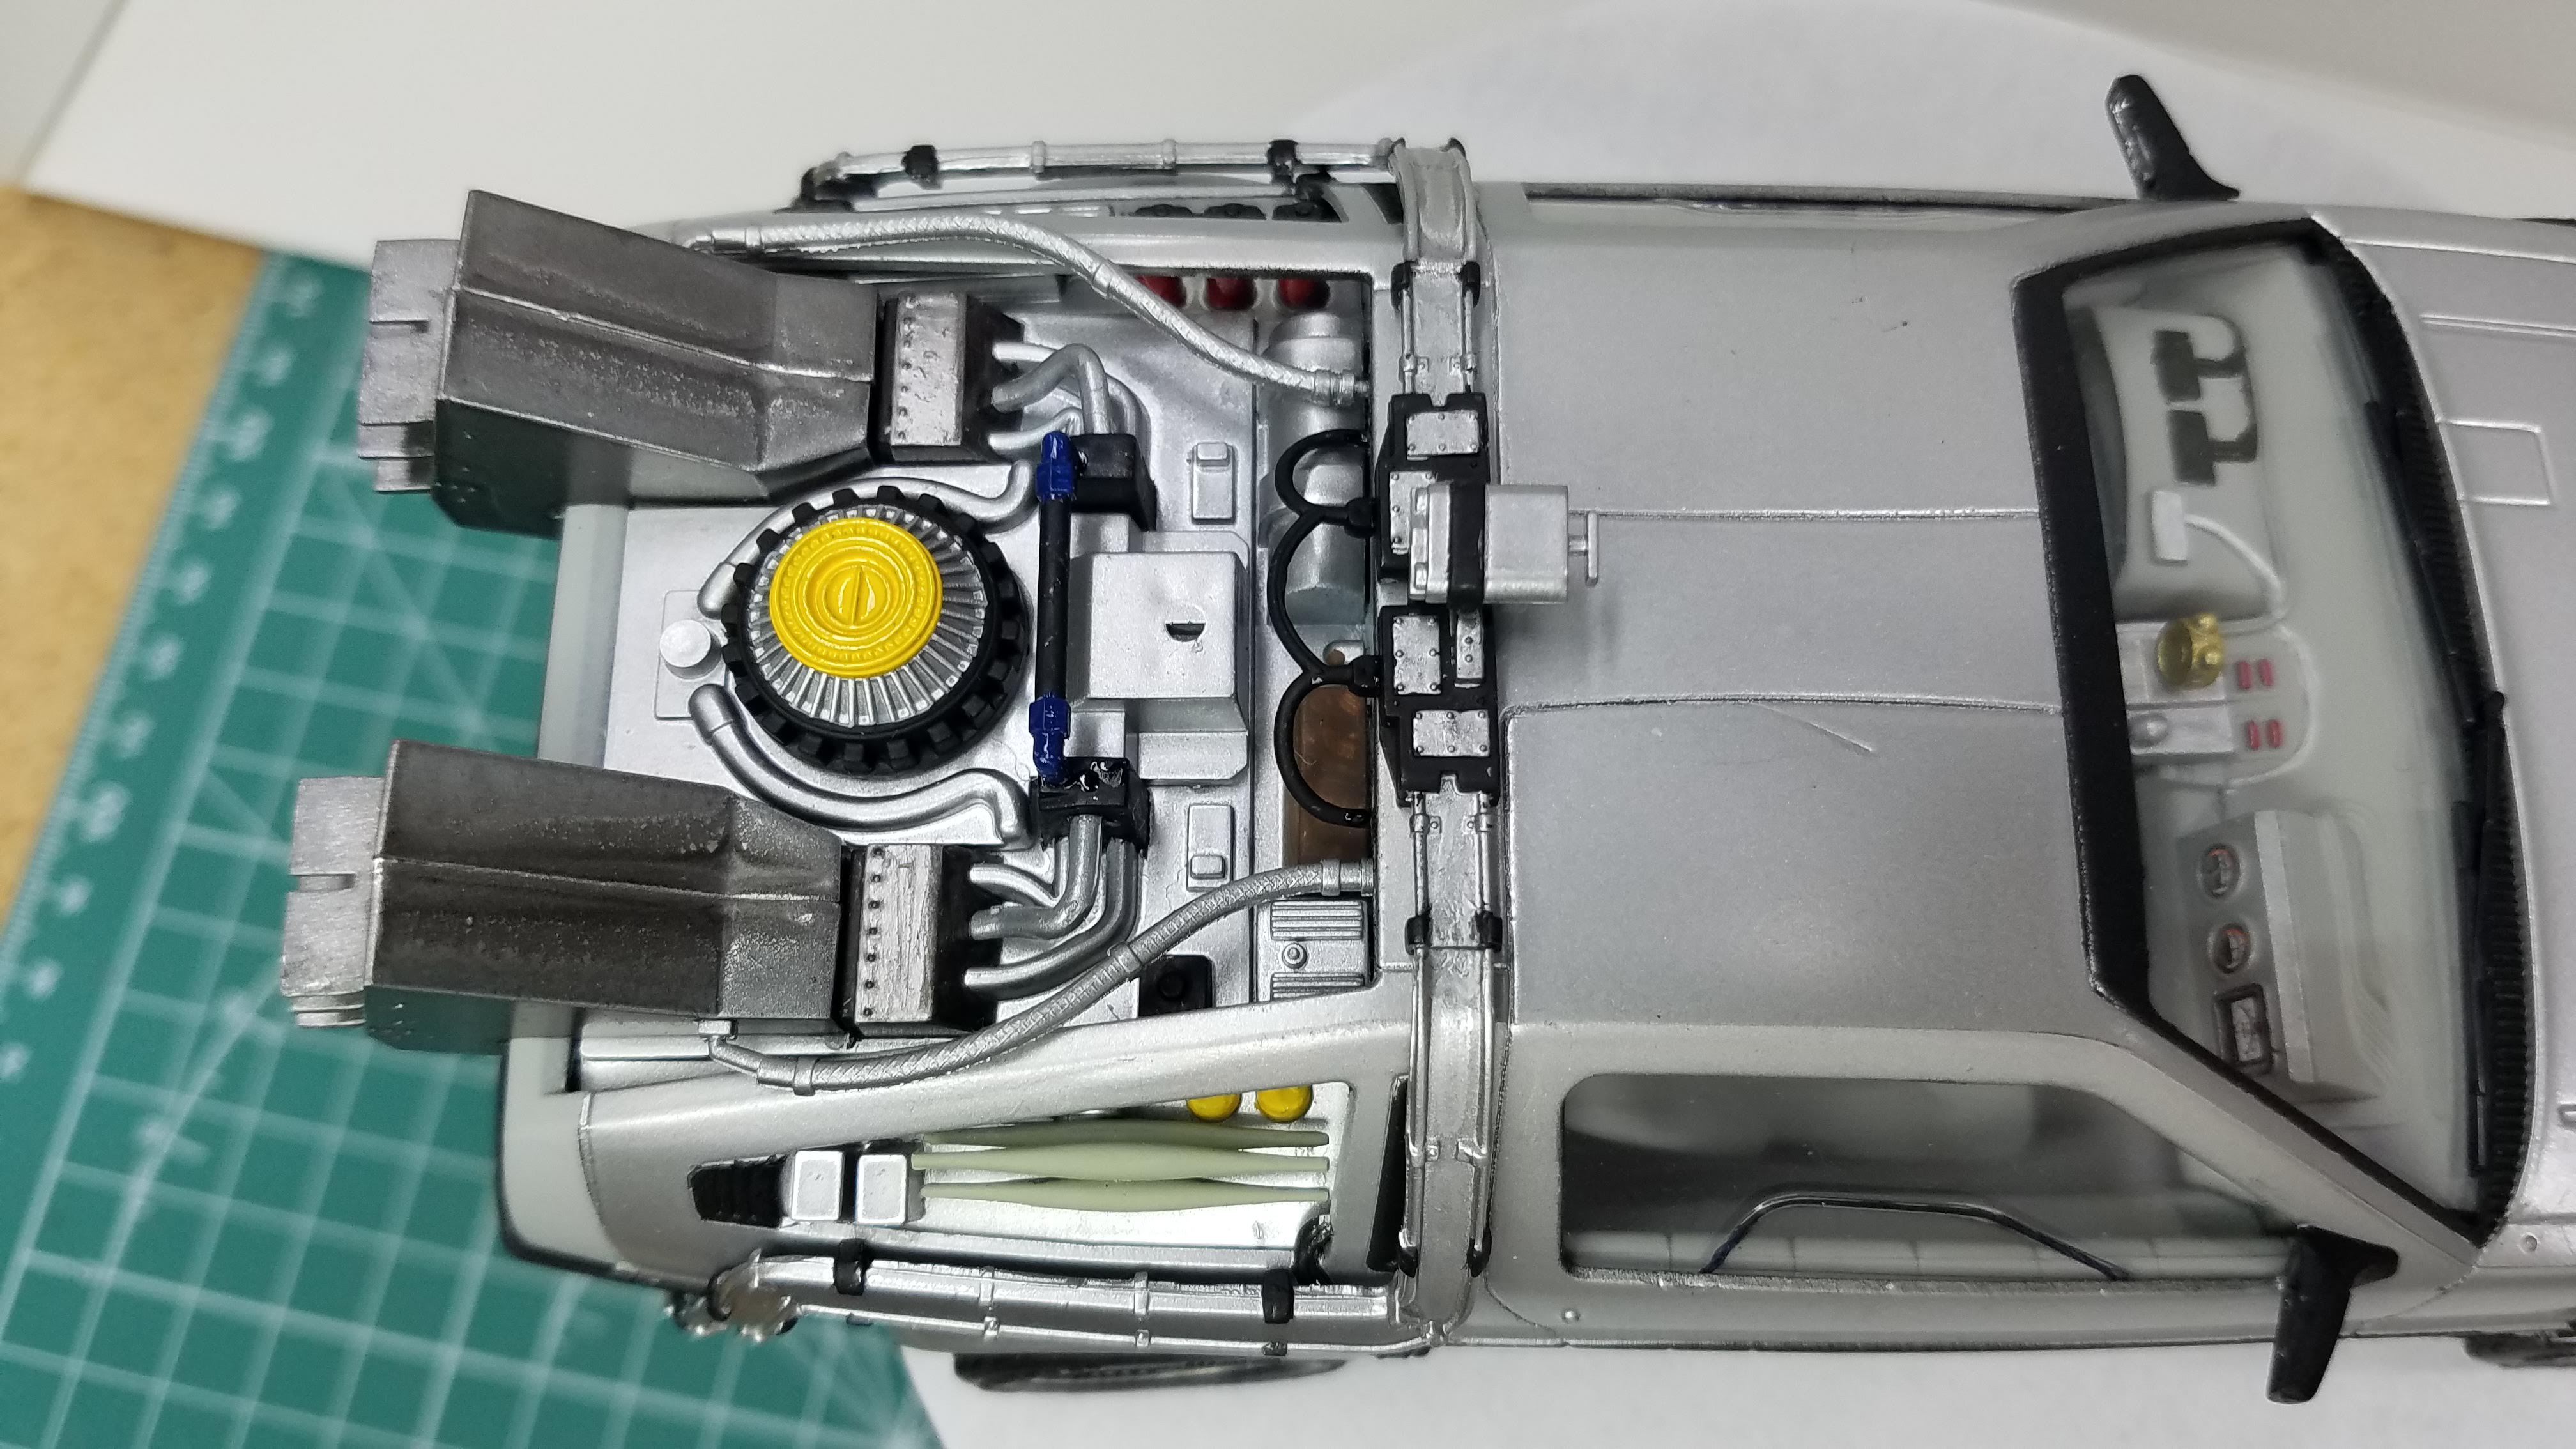 Top view of the finished engine shroud from the left